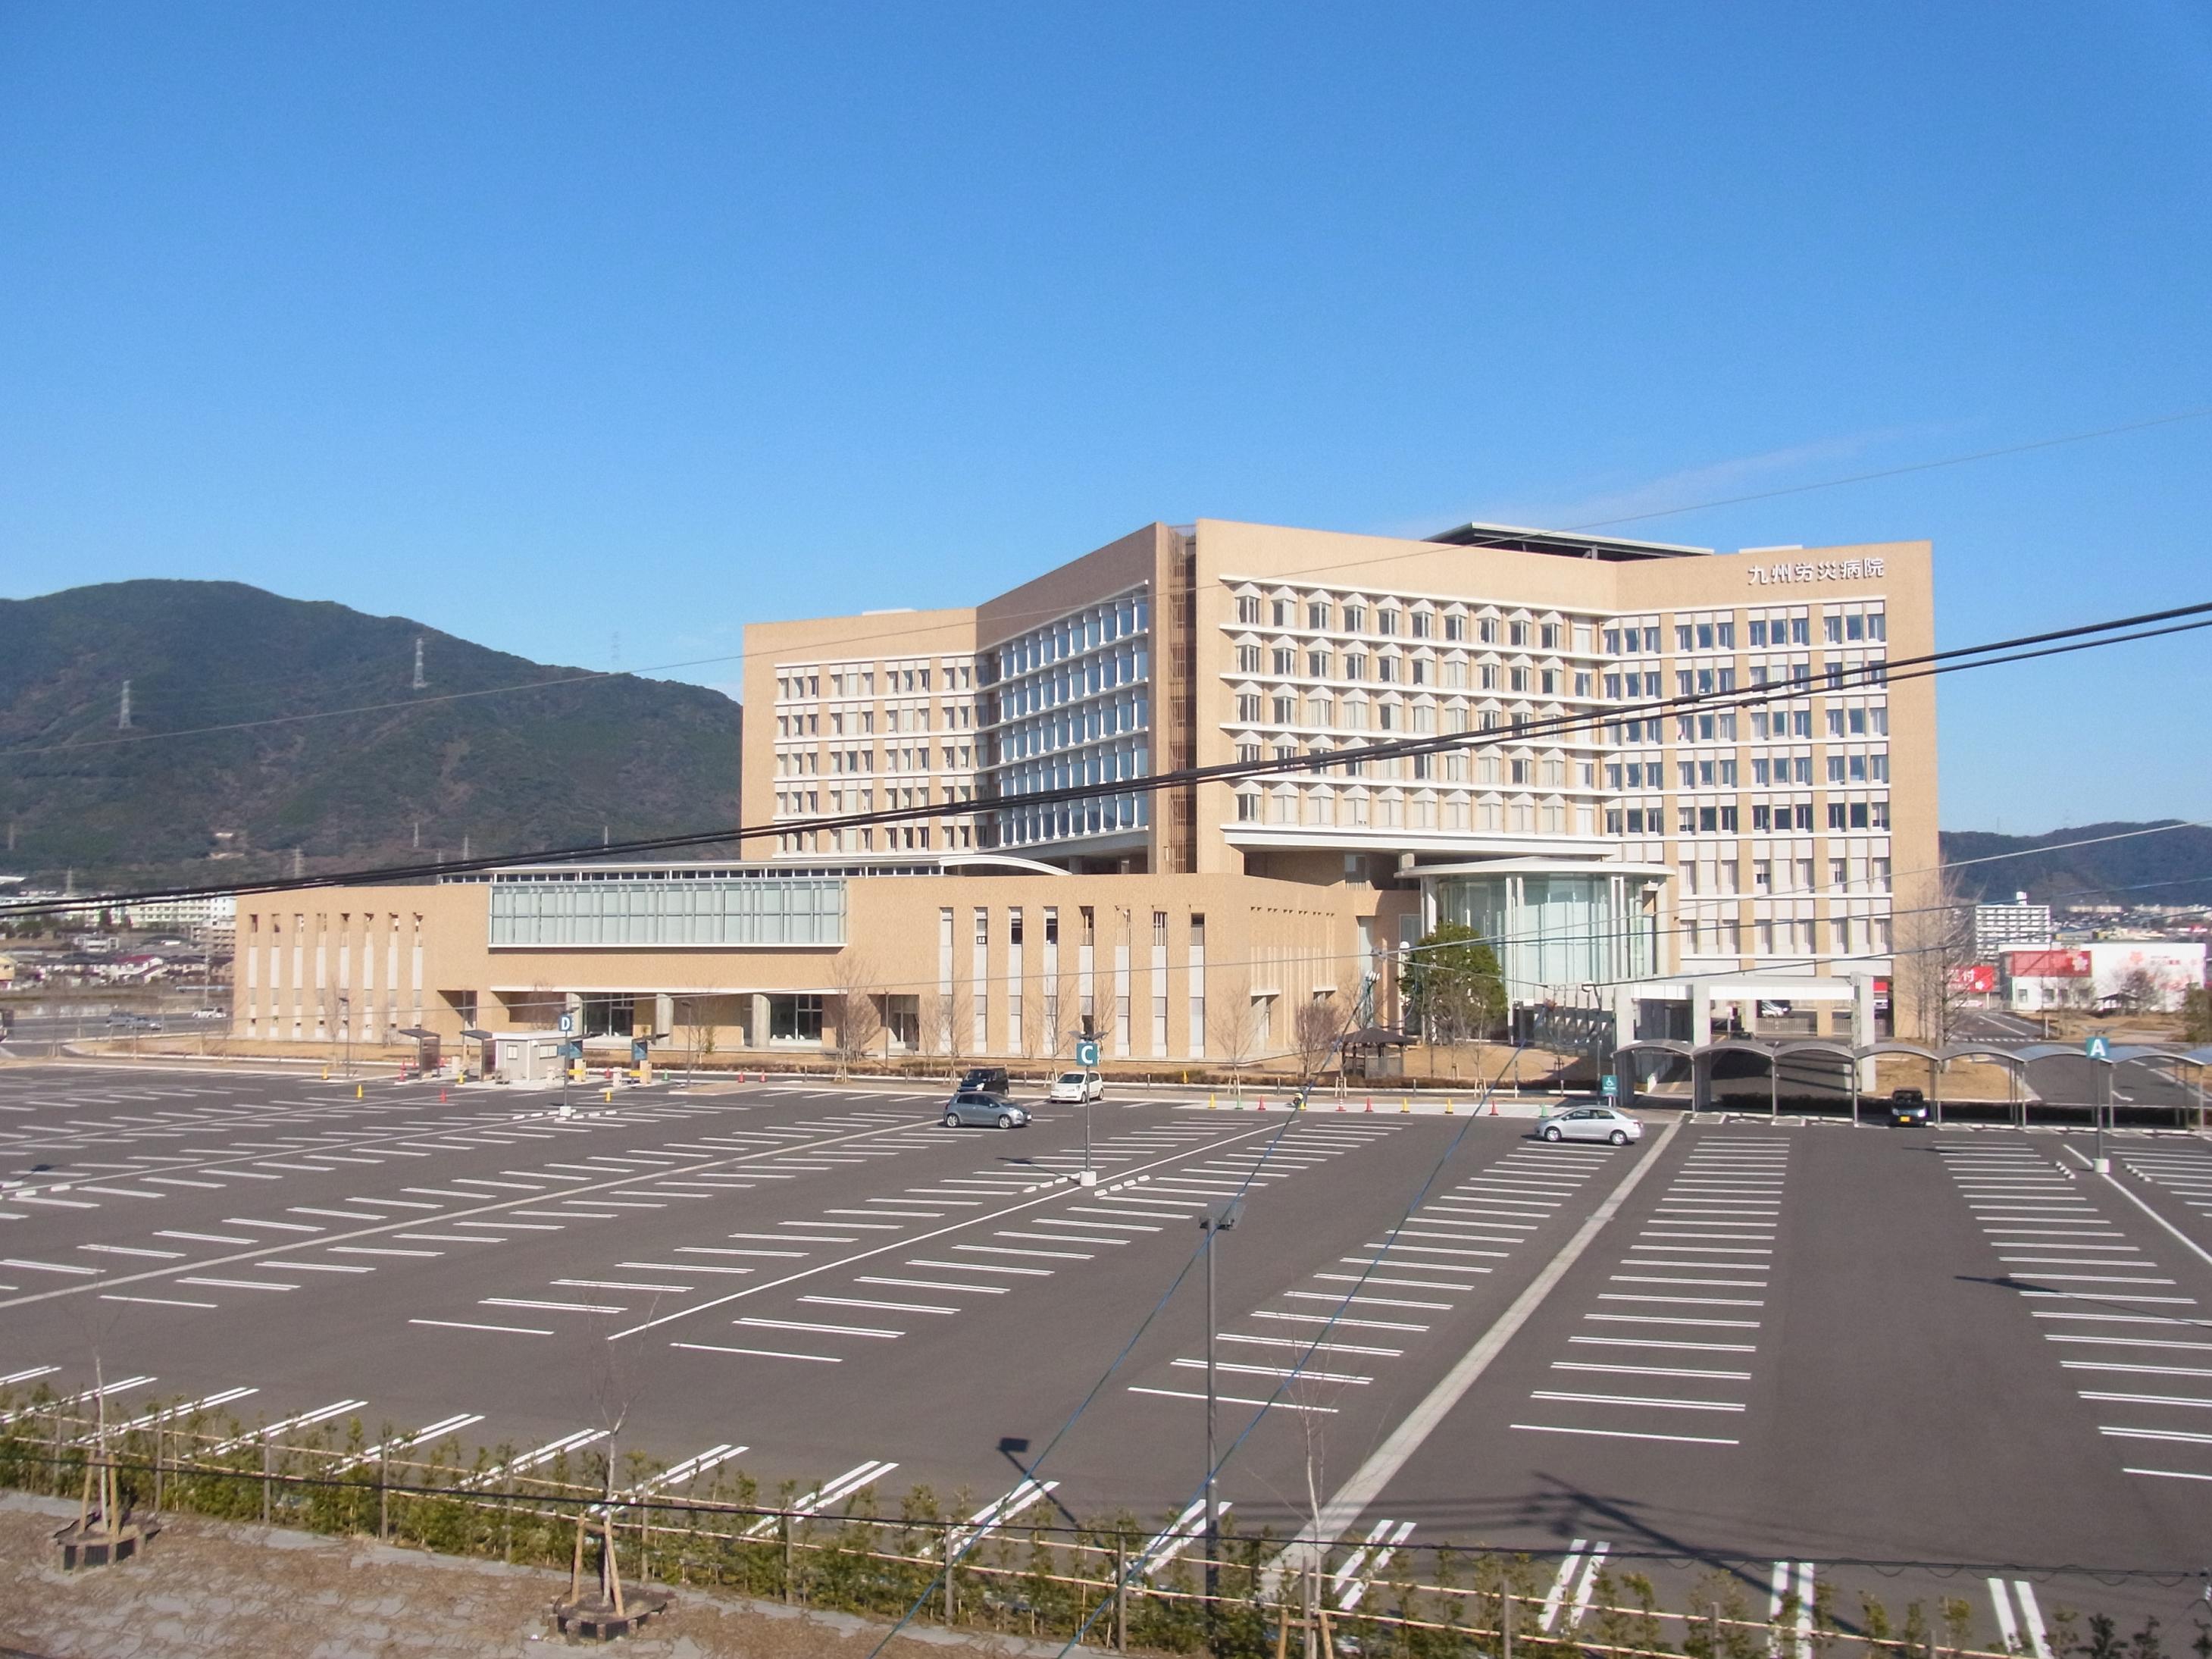 Hospital. 1443m to the National Institute of Labor Health and Welfare Organization Kyushurosaibyoin (hospital)